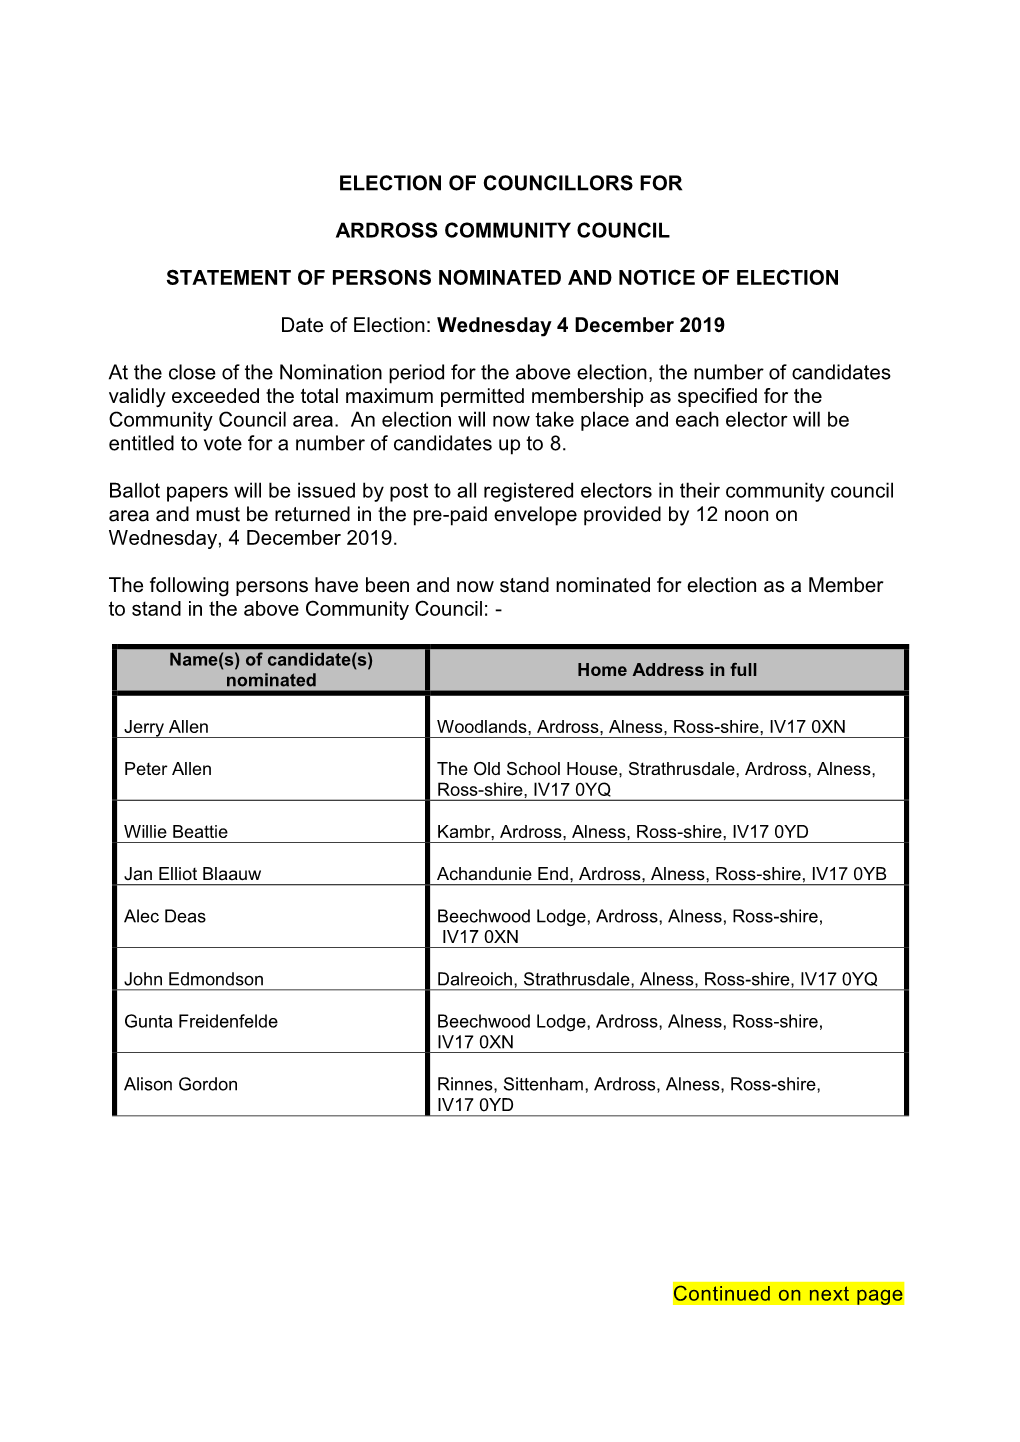 Election of Councillors for Ardross